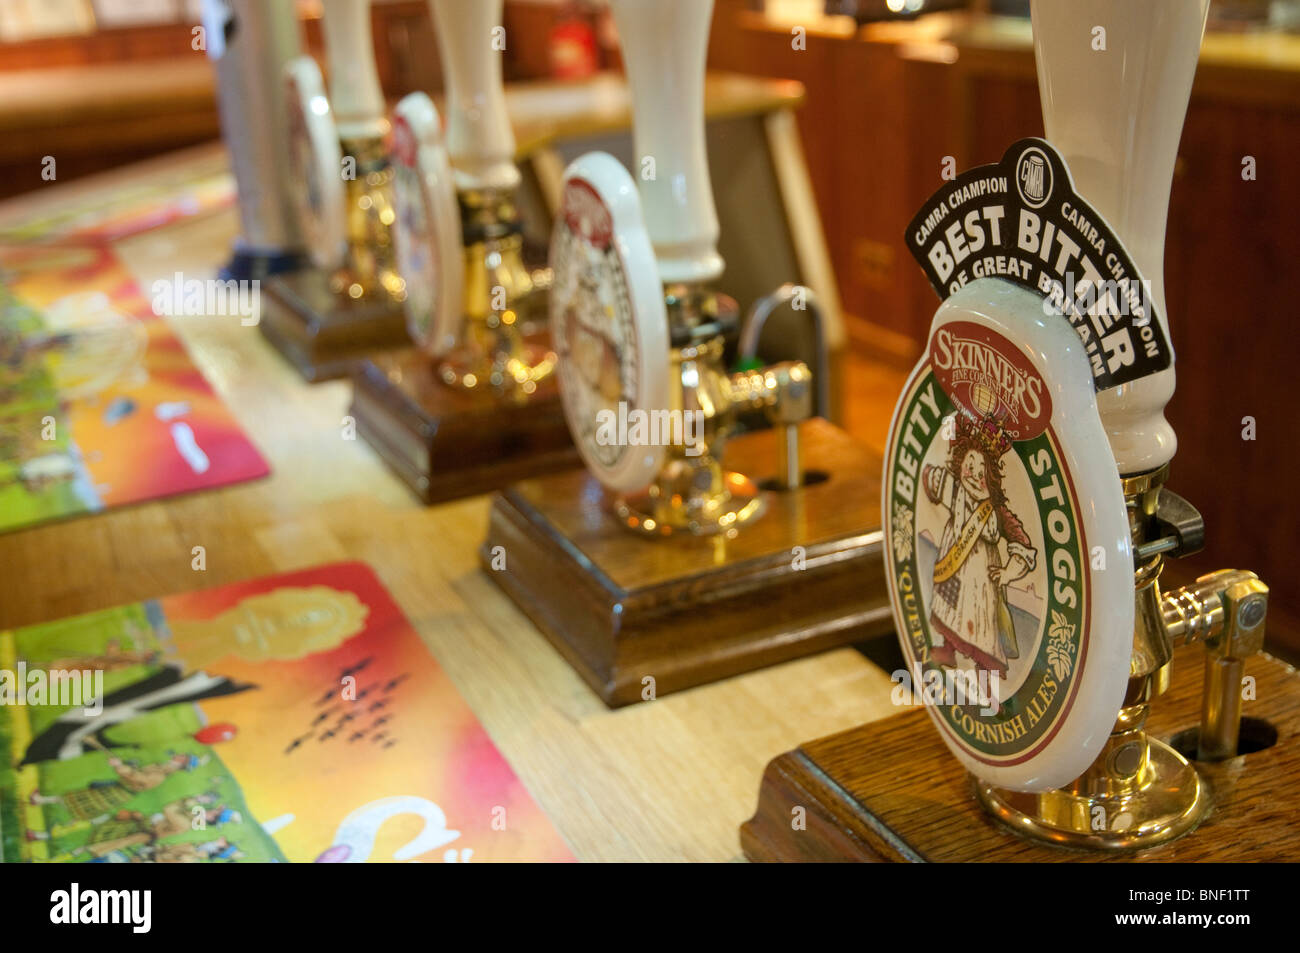 Selection of Skinner's handpumps in the visitors bar at the brewery, in Truro, Cornwall. Stock Photo